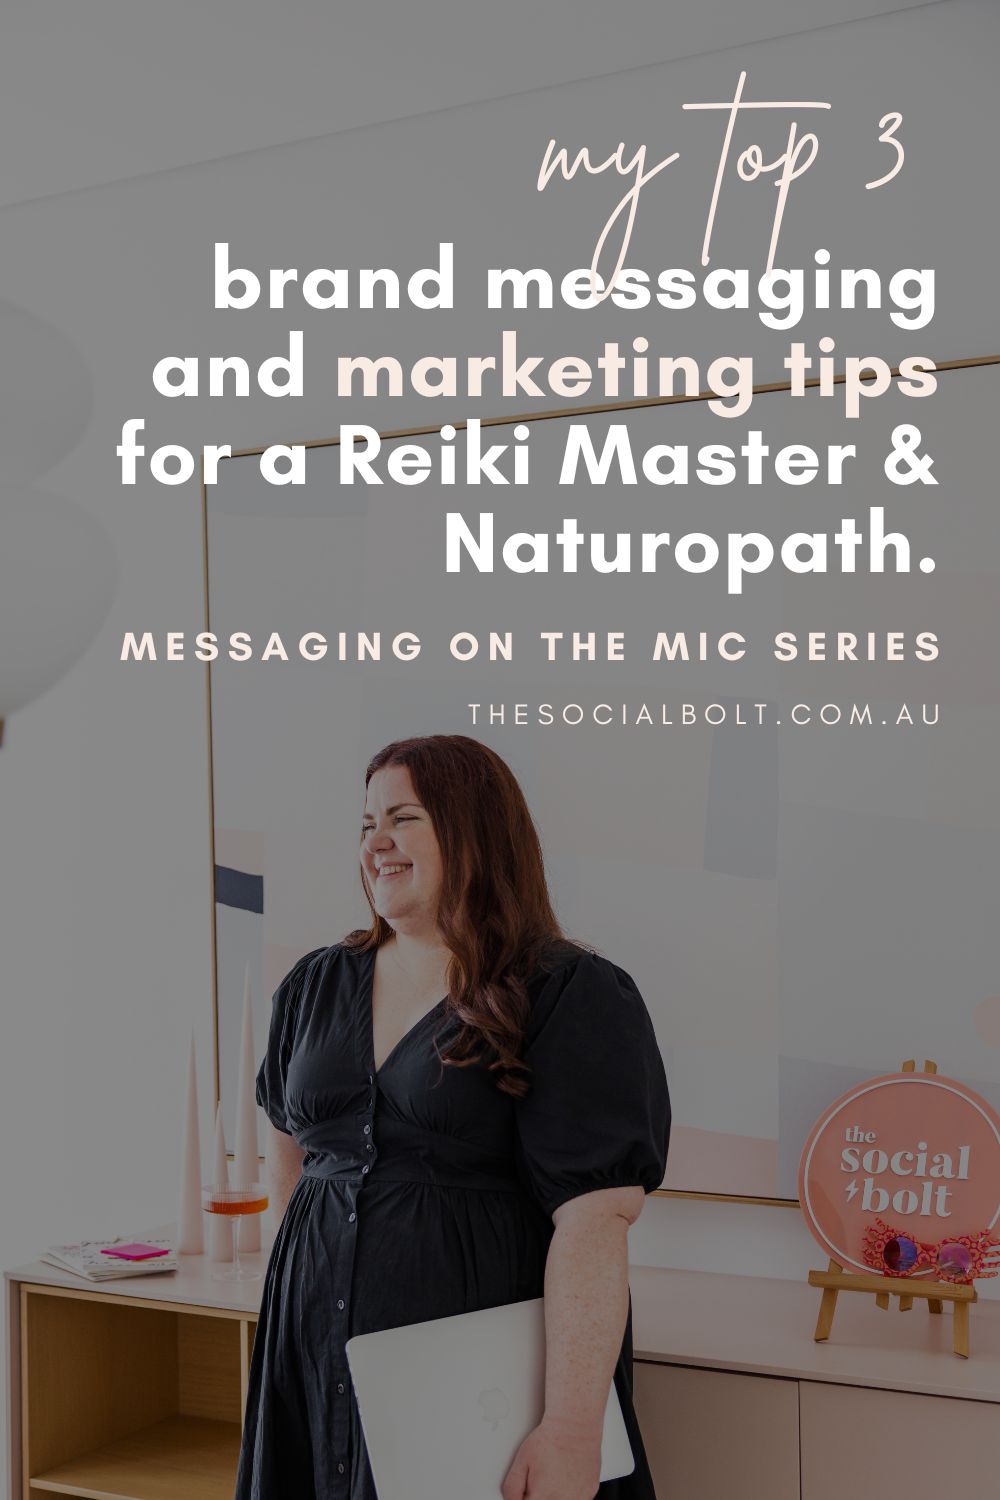 Brand messaging tips for a Reiki Master & Naturopath